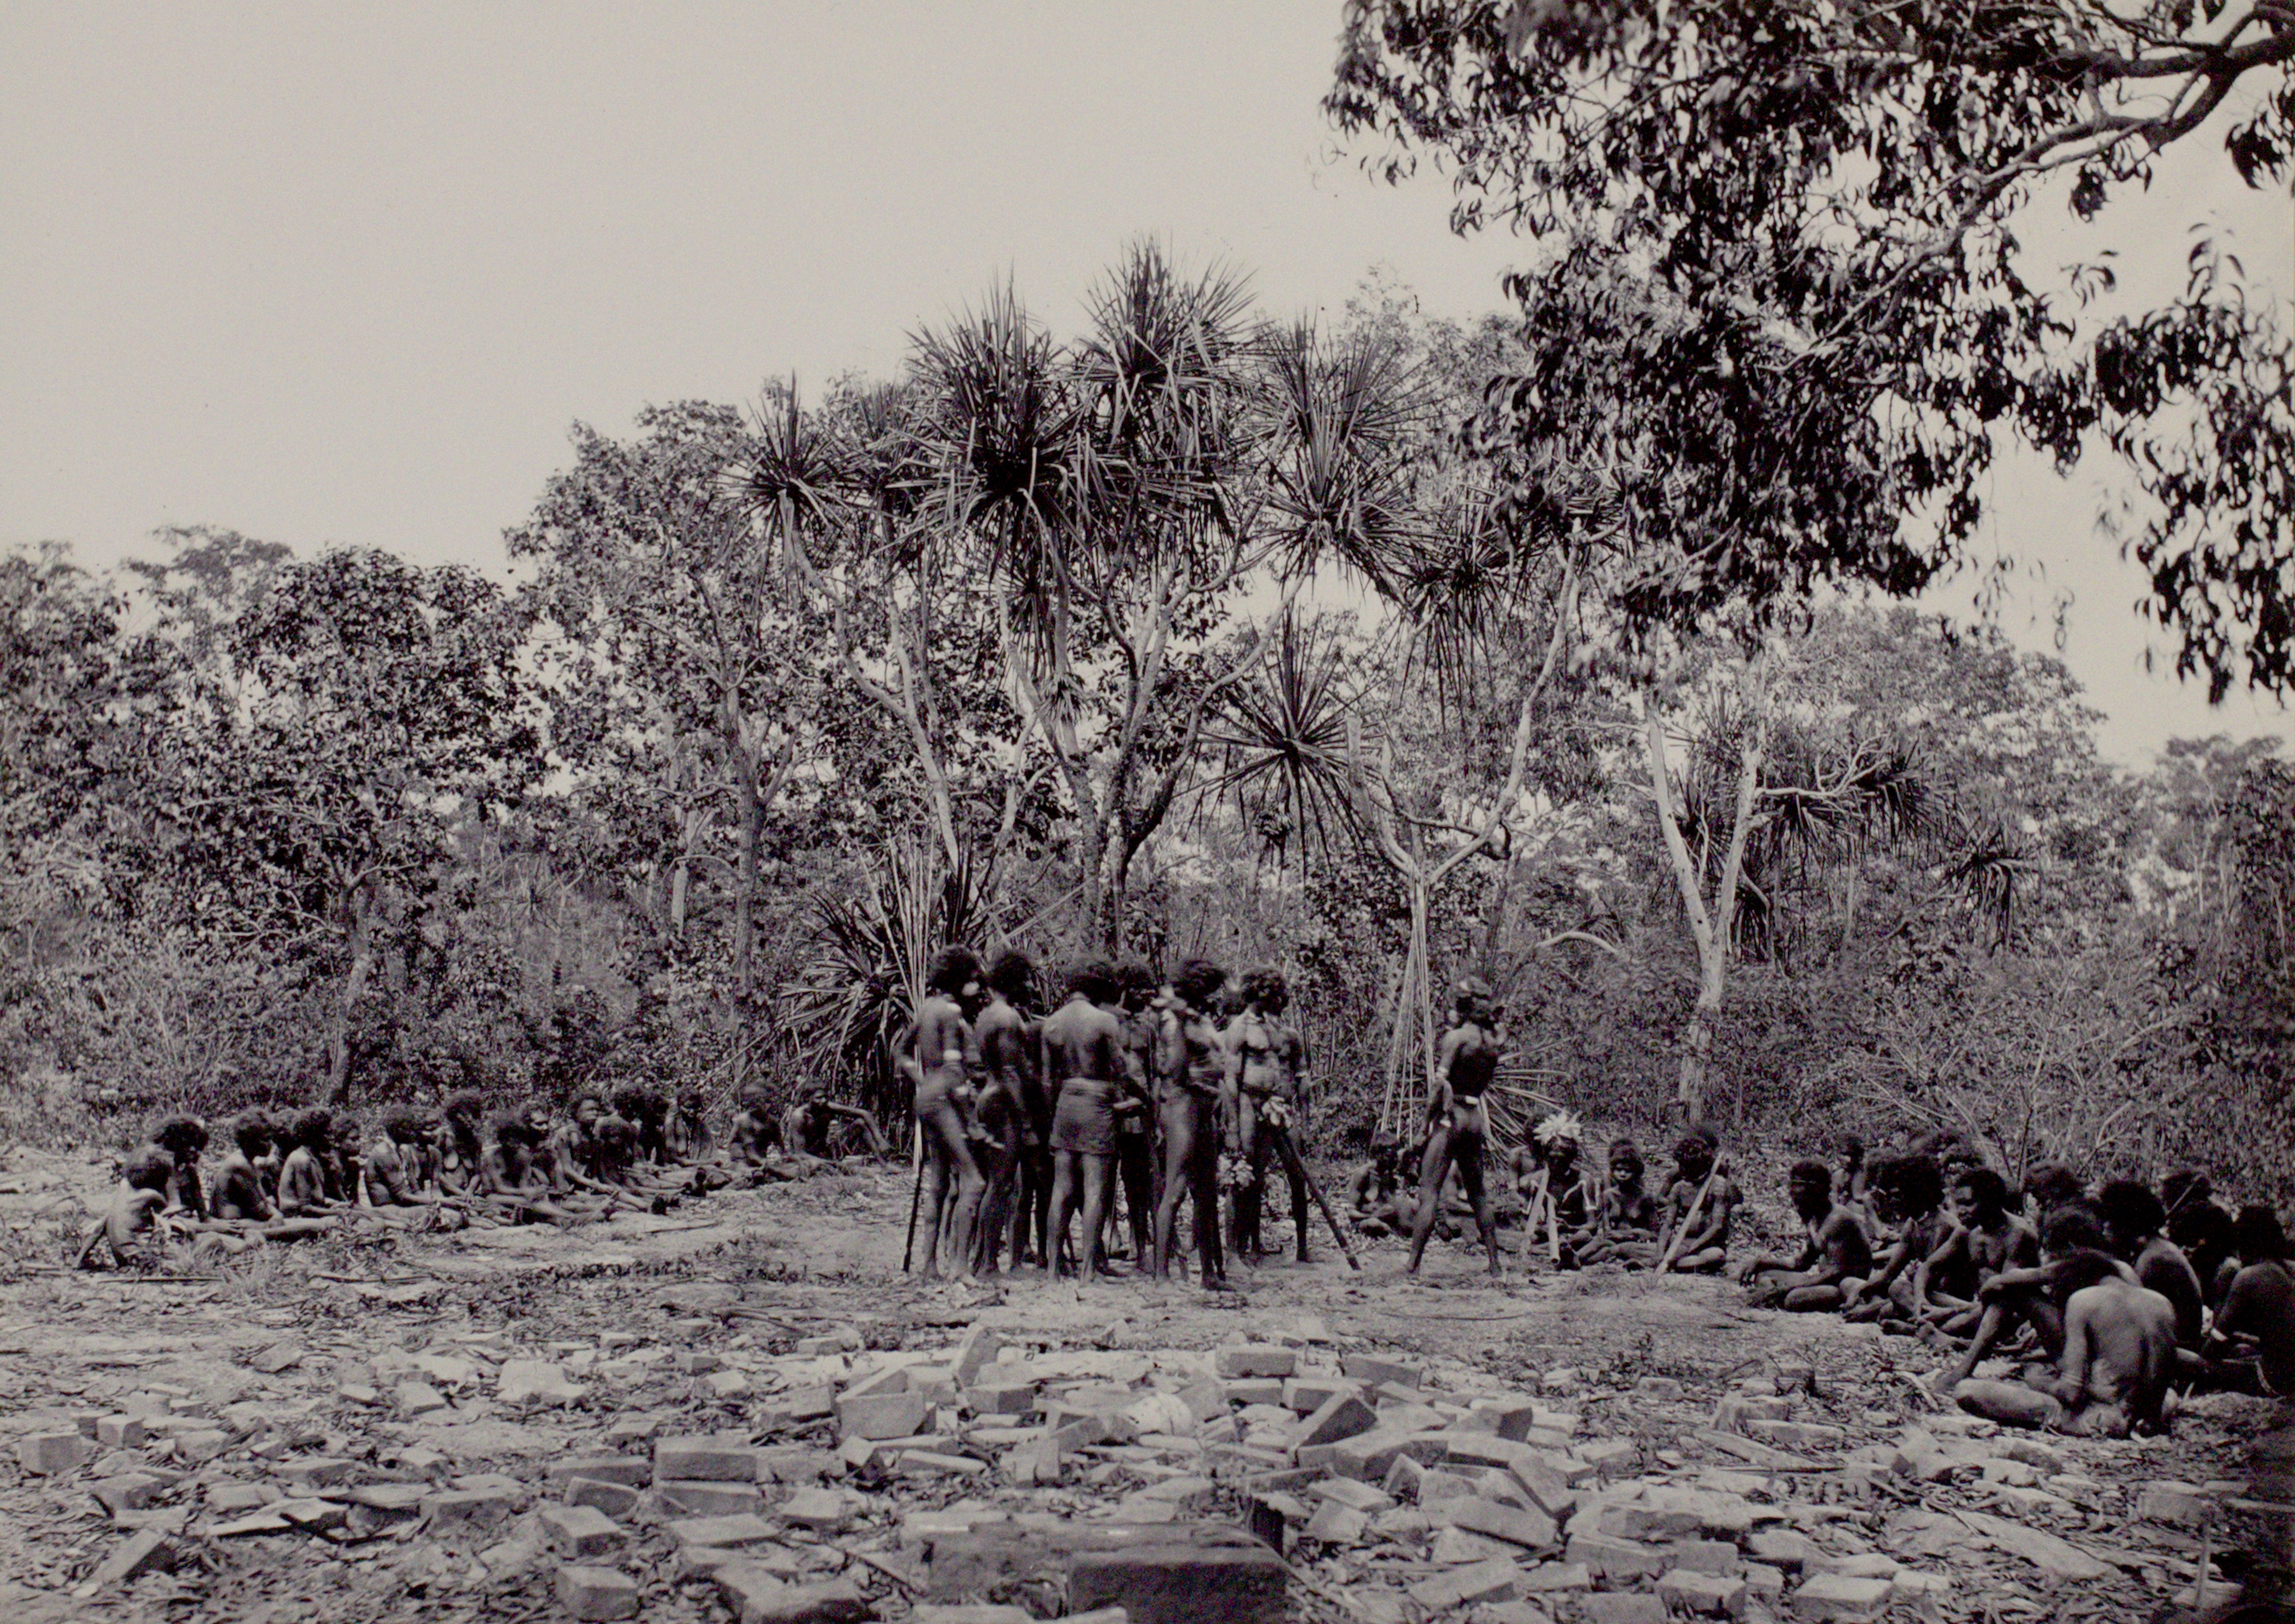 A group of Aboriginal men prepare for dance, surrounded by a seated audience of Aboriginal men, women and children. In the background is a stand of pandanus and in the foreground are piles of bricks from the old Port Essington settlement.